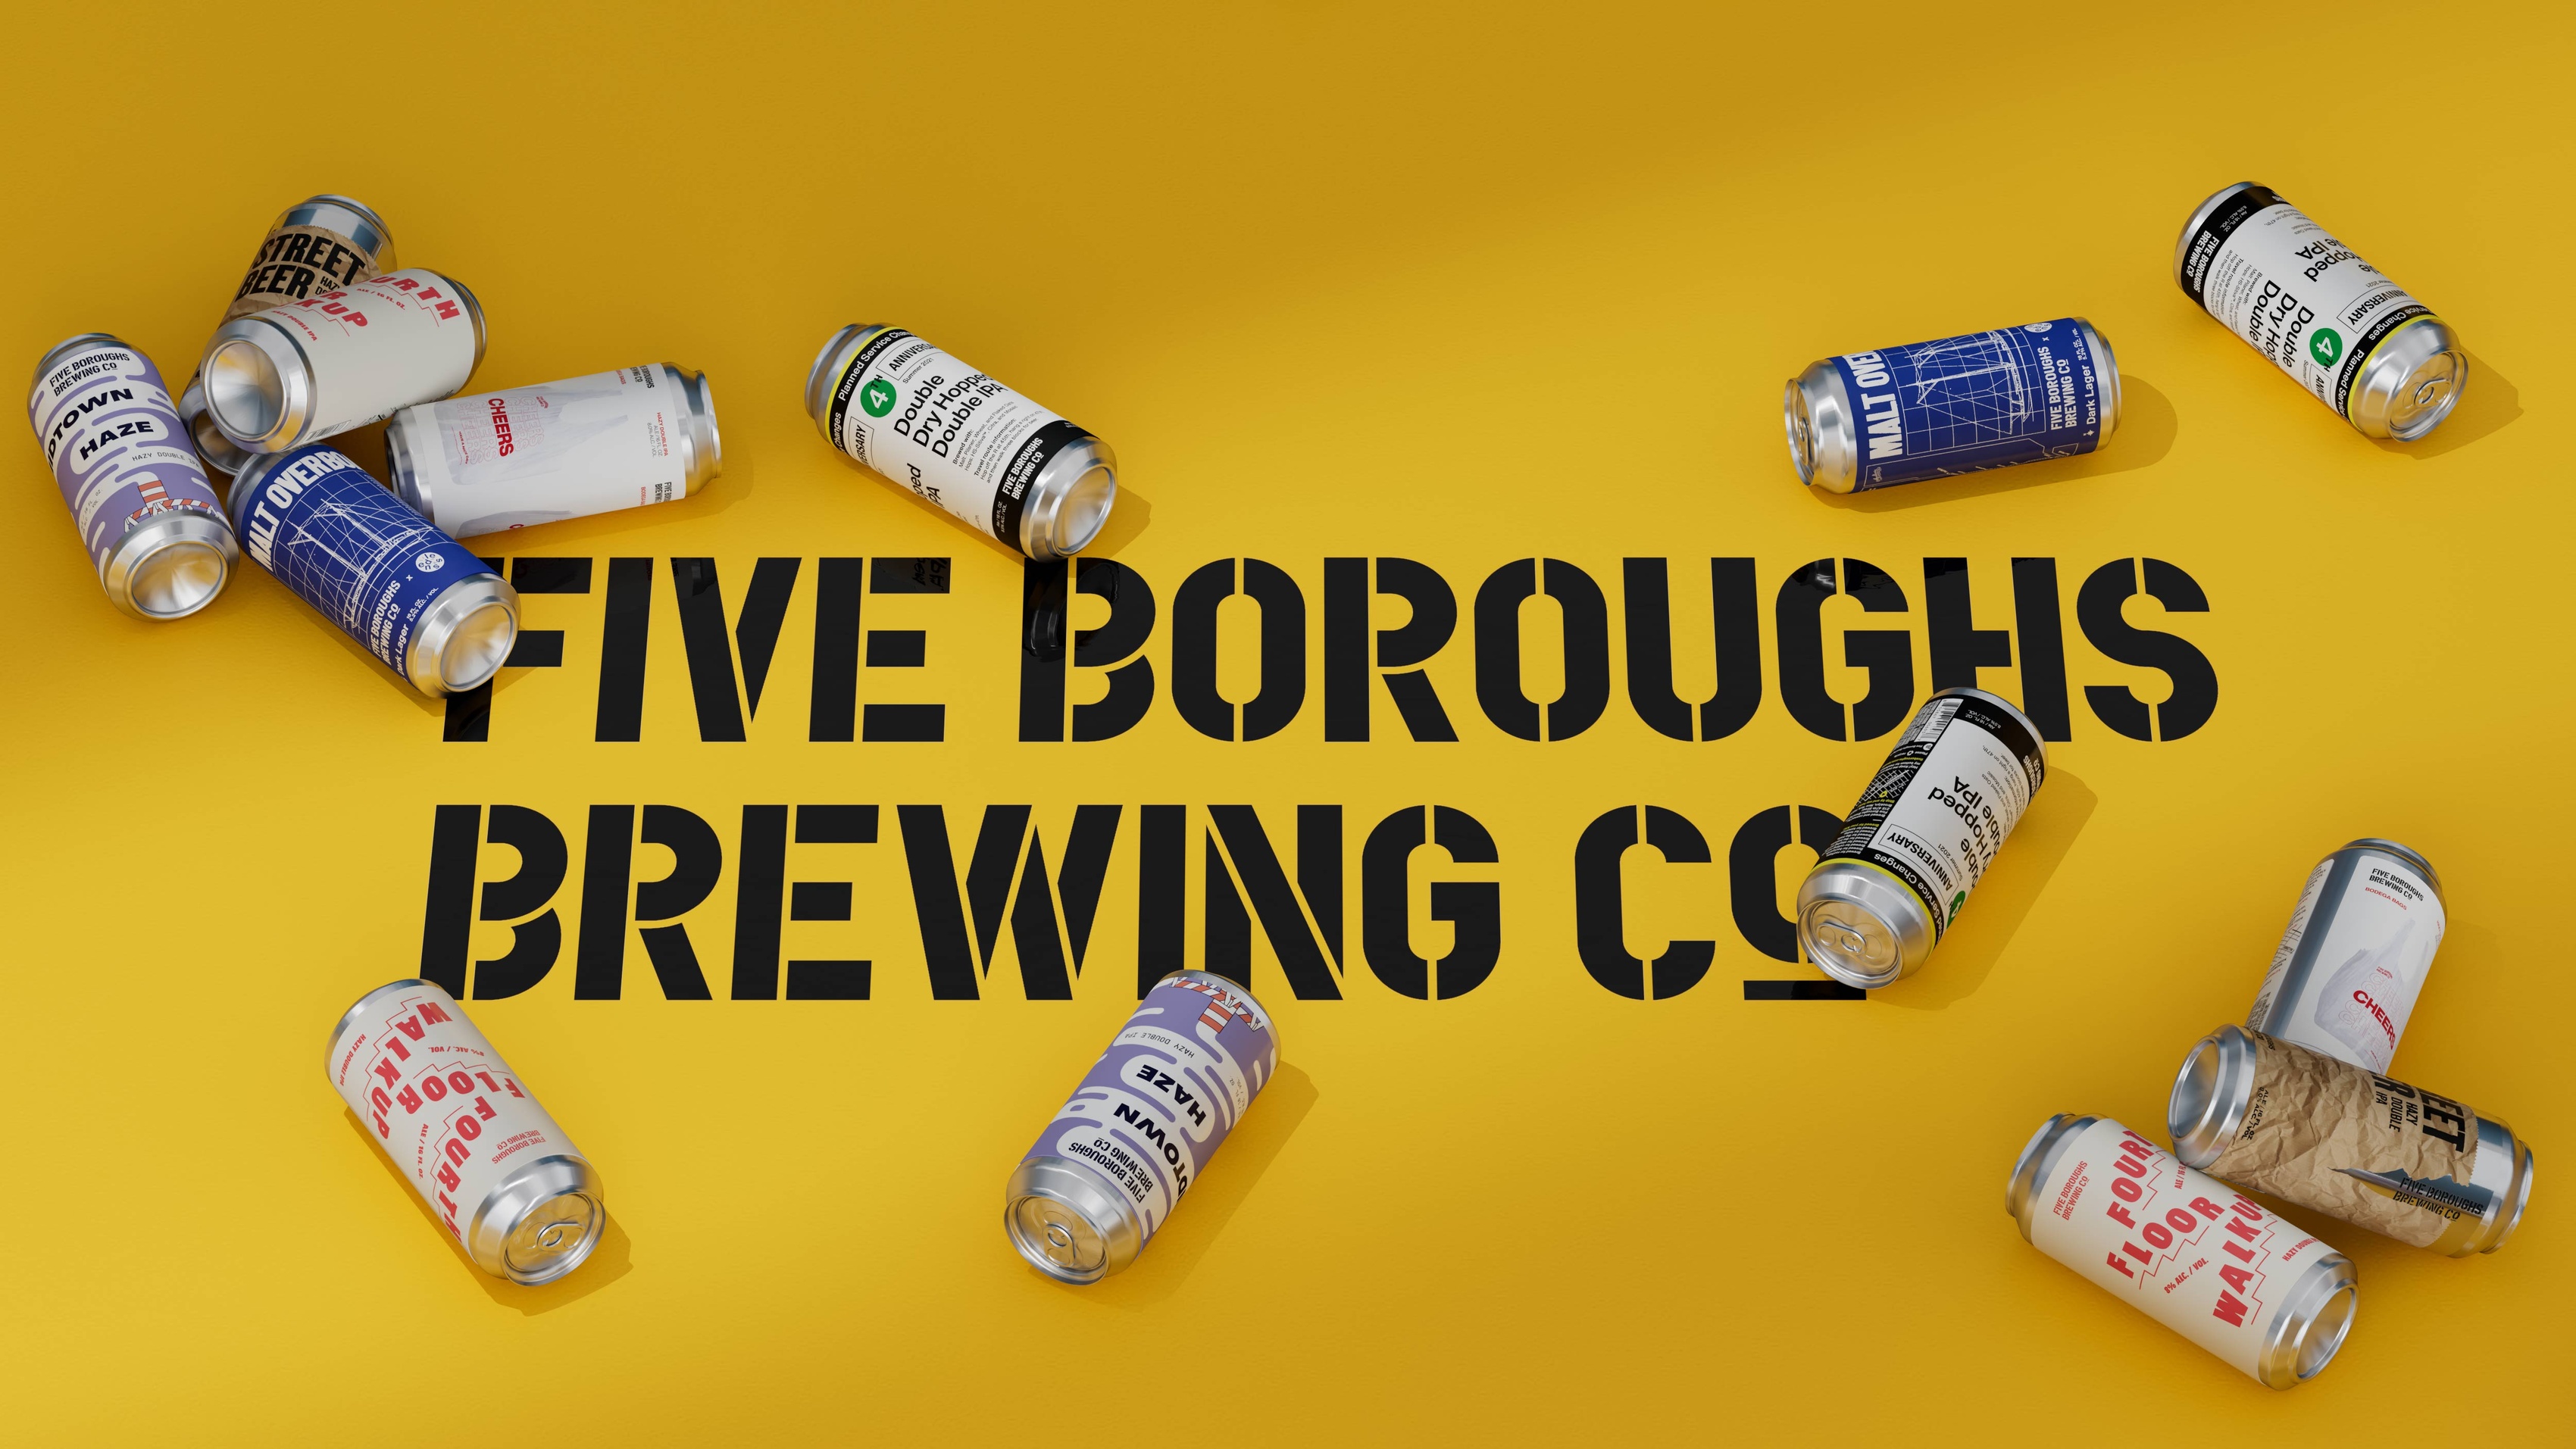 A bunch of Five Boroughs Brewing cans sprawled over the logo on a yellow background